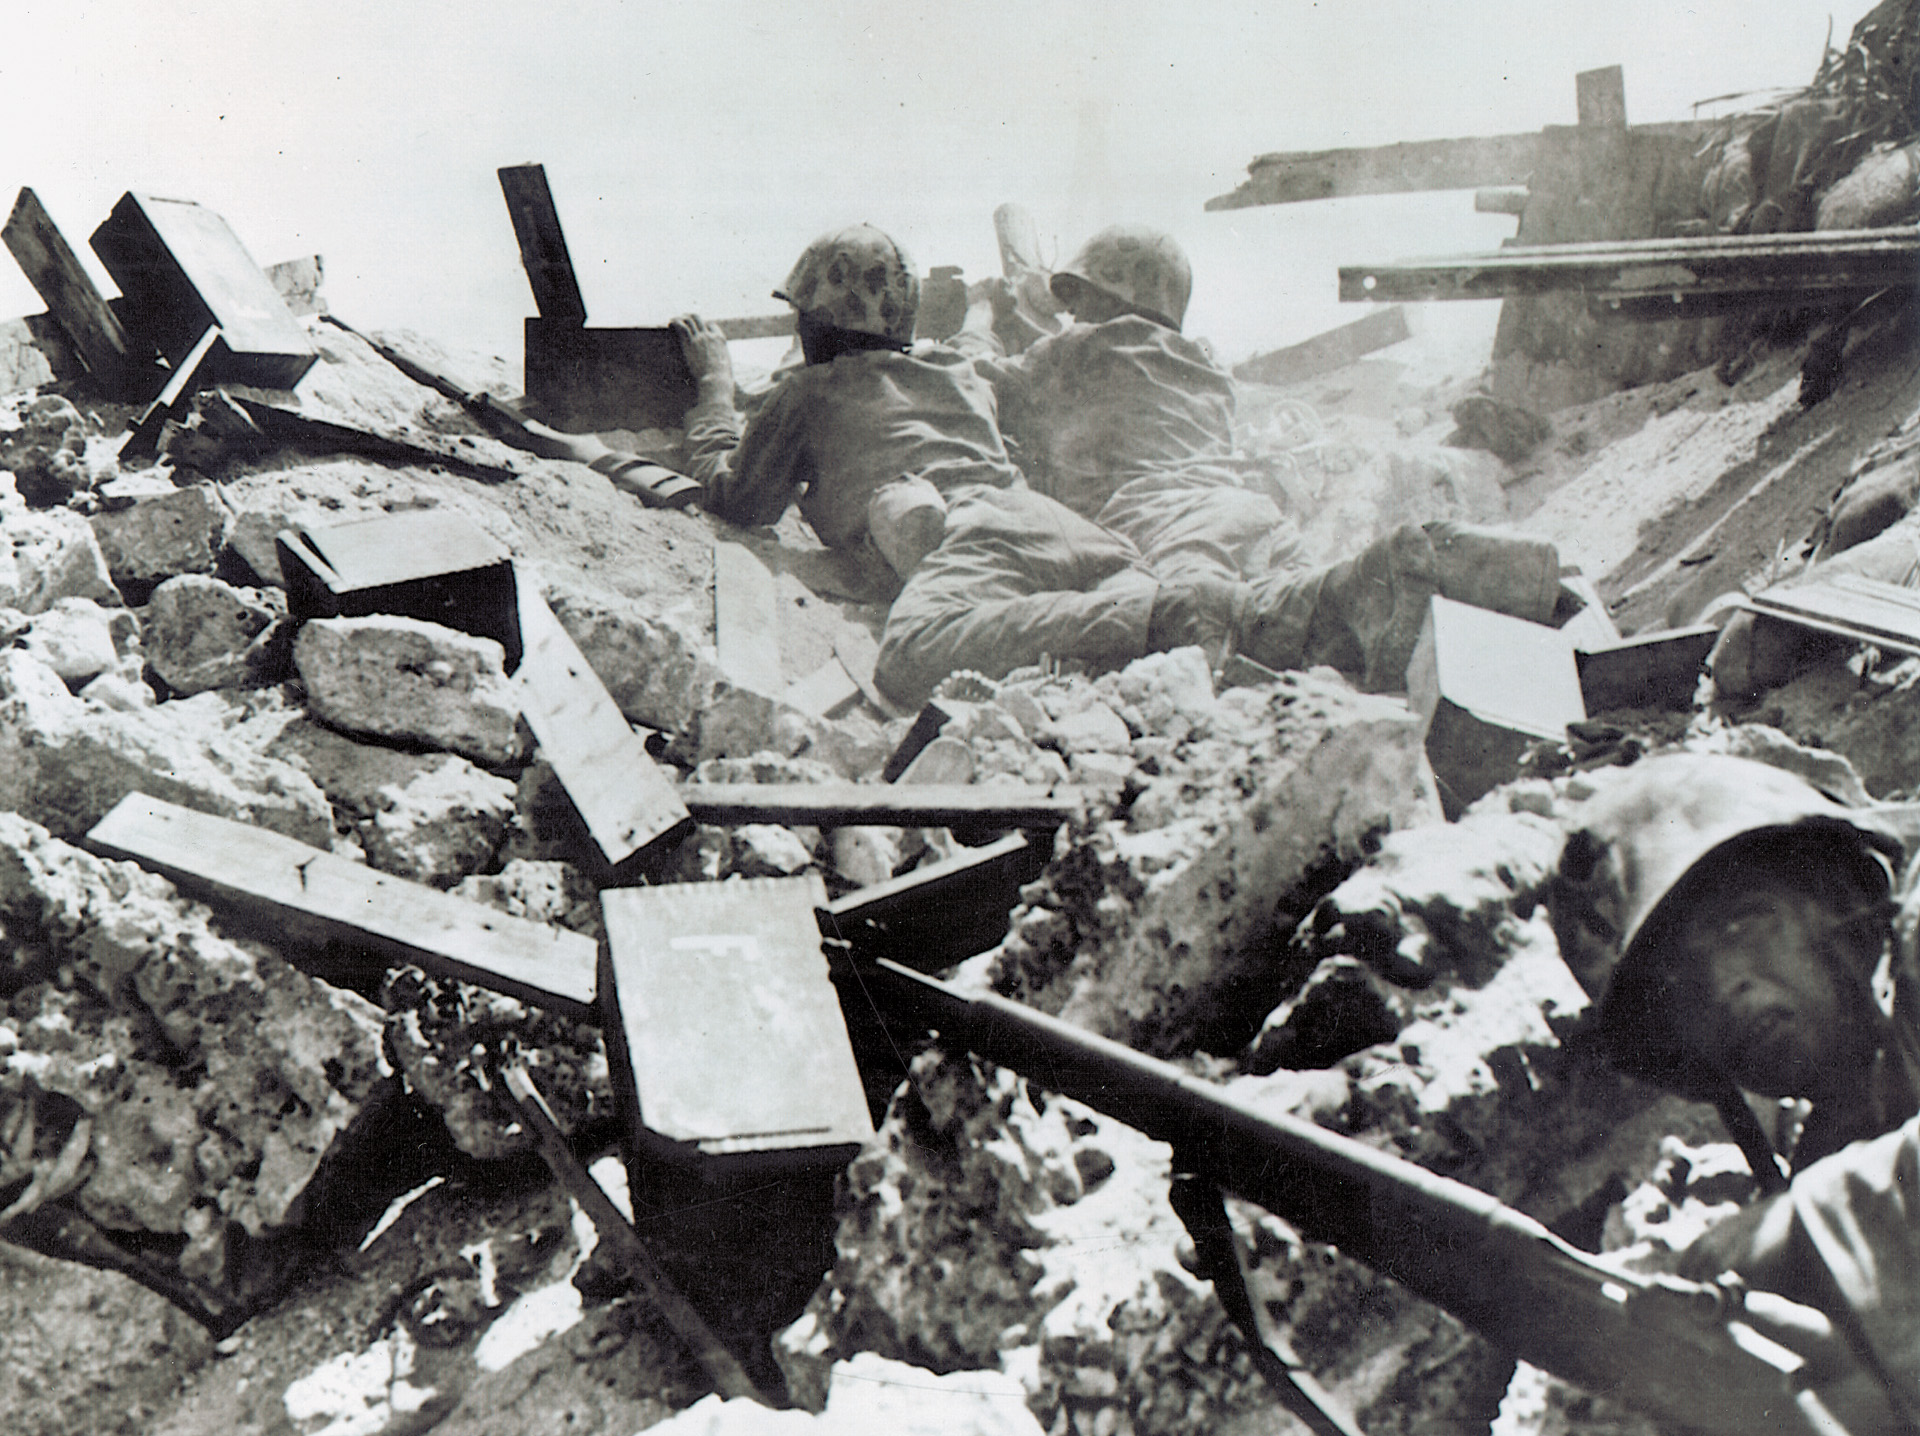 A pair of marines feverishly operates a machine gun amid the rubble of Betio while a third places his rifle to the side and crawls forward to their aid.